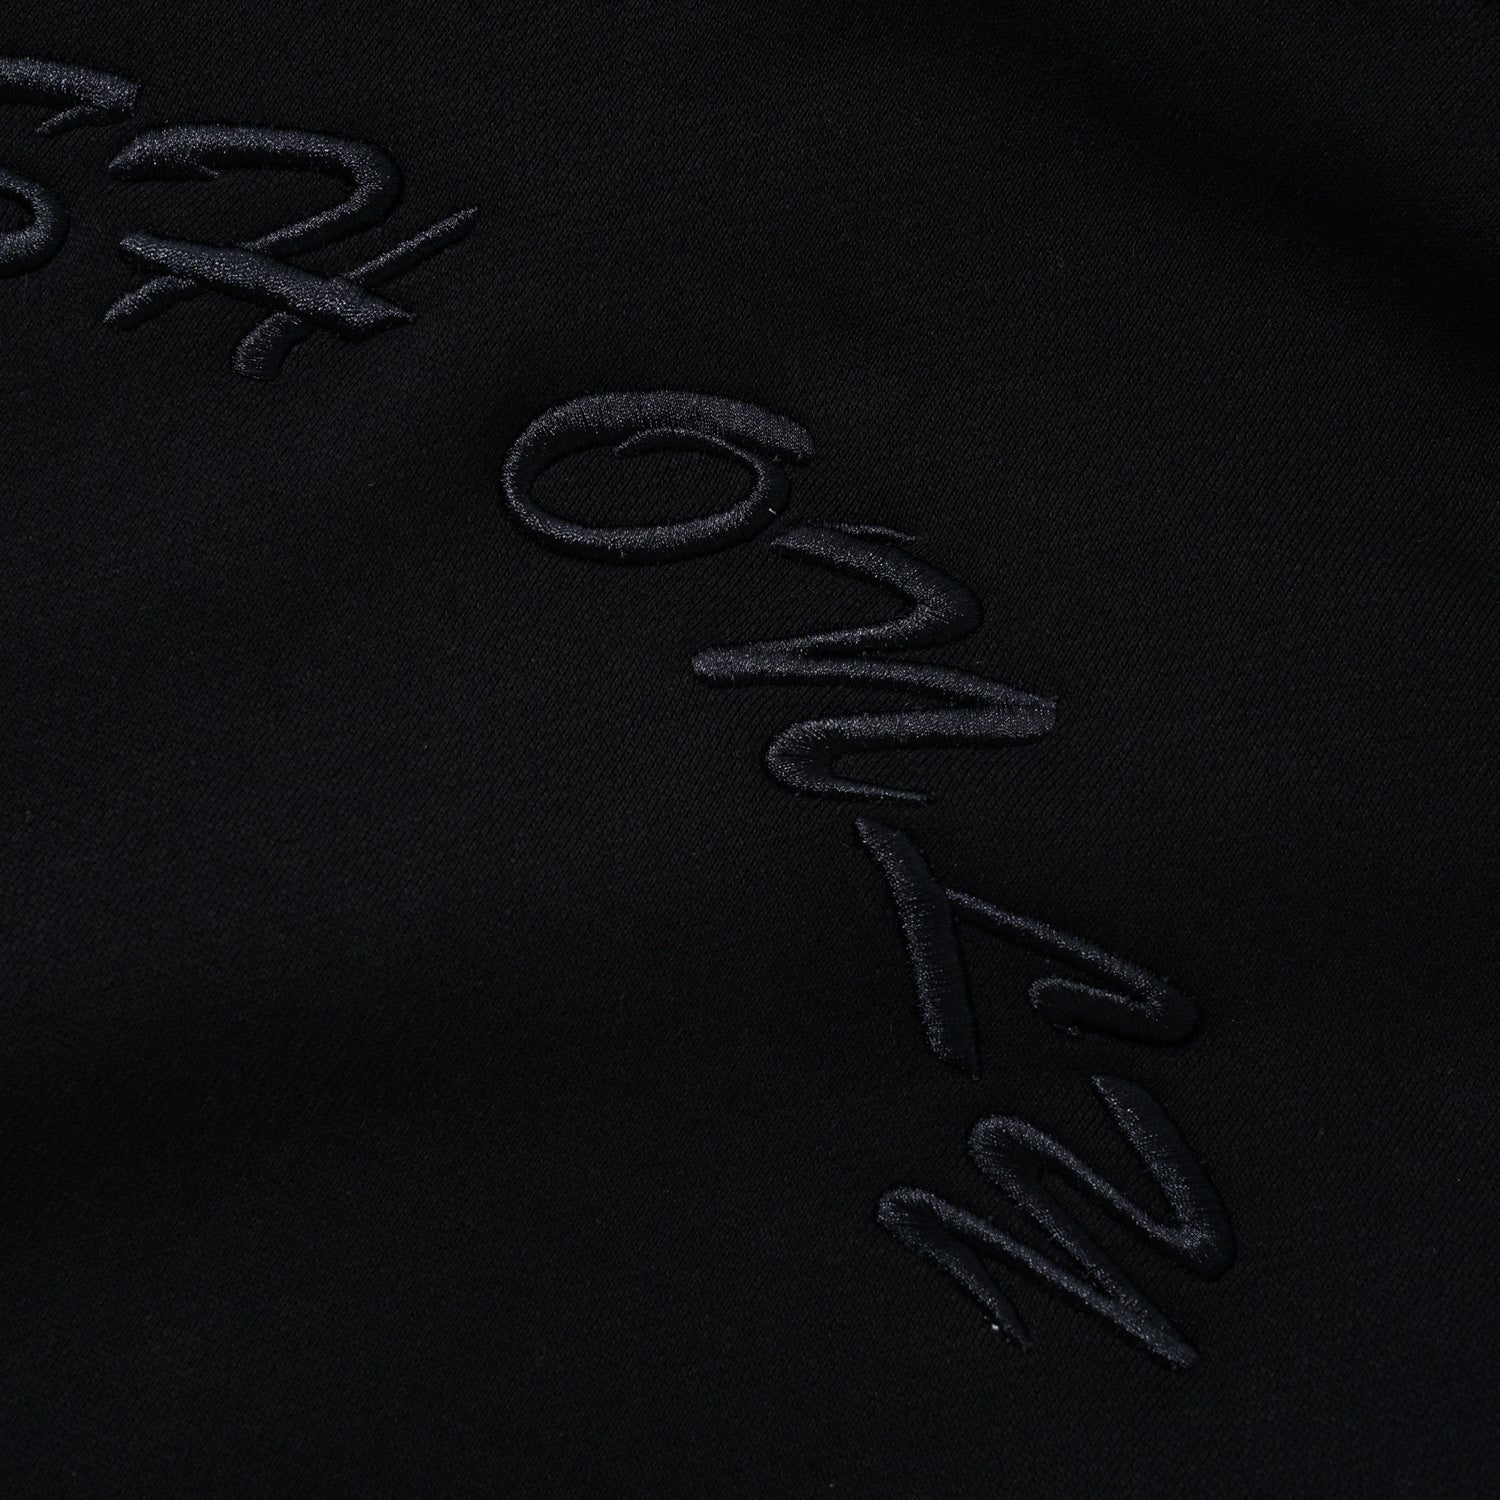 Embroidered Logo Pullover Hoodie, Black